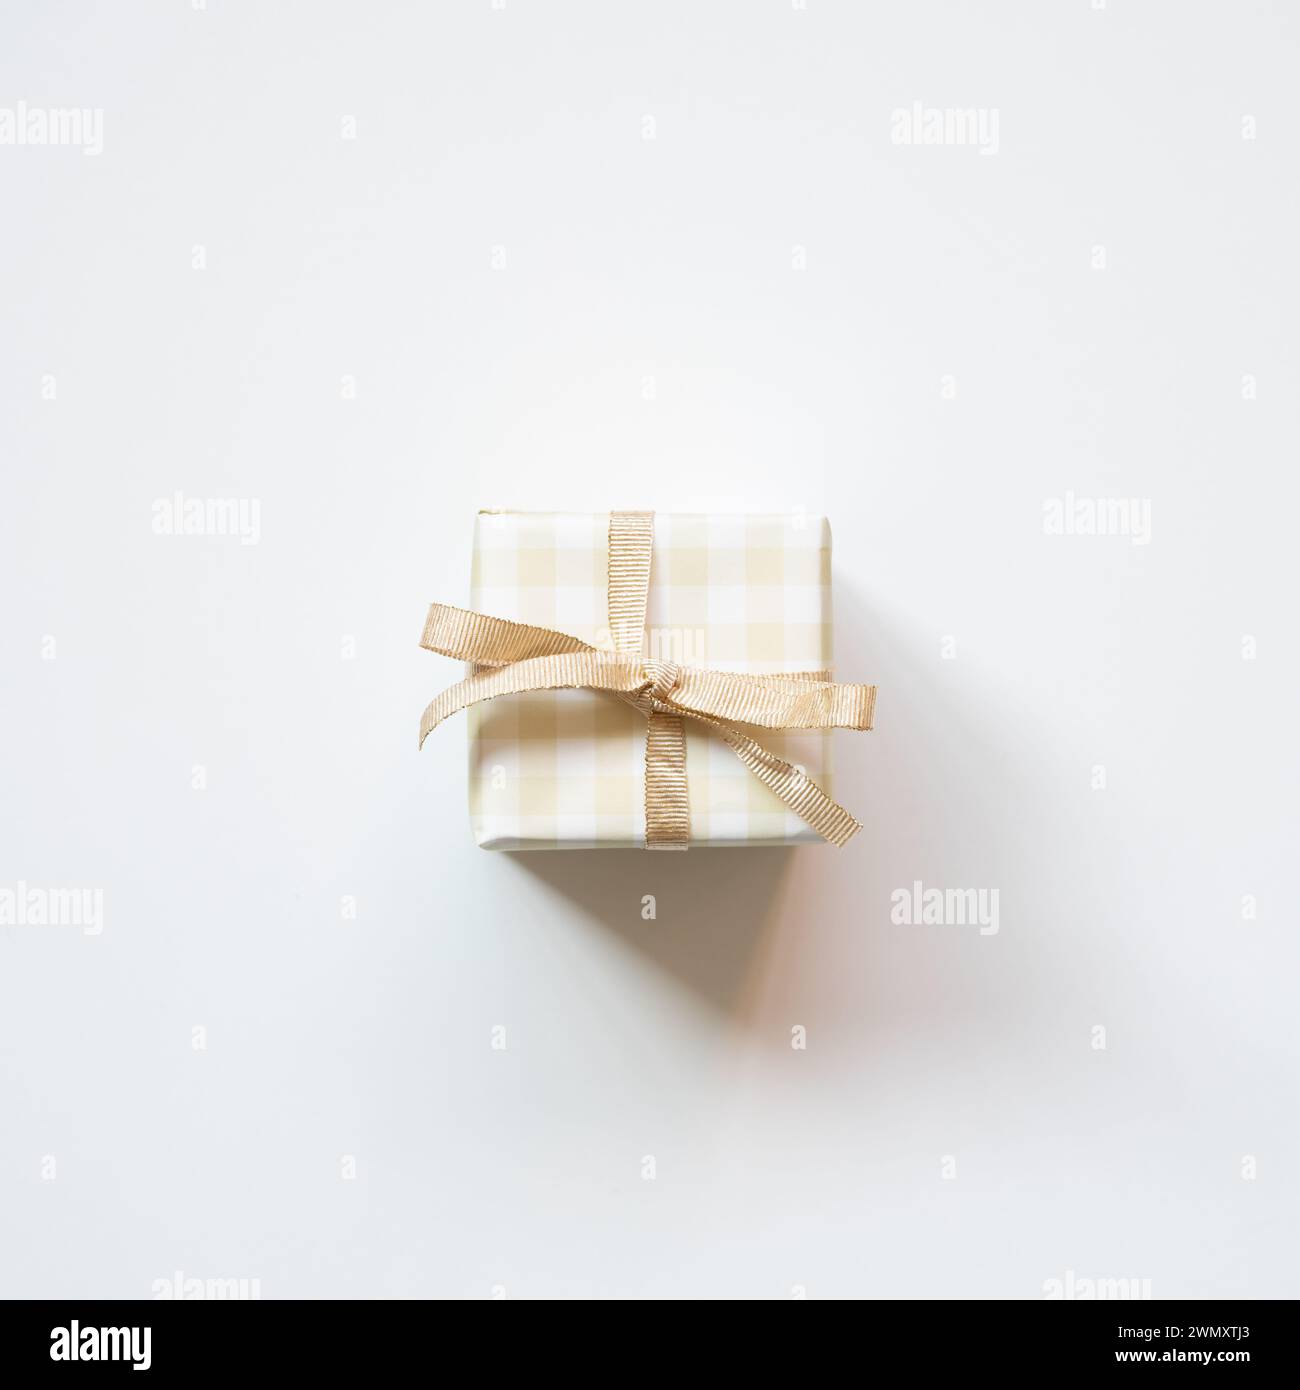 Ivory check pattern gift box isolated on white background. top view Stock Photo